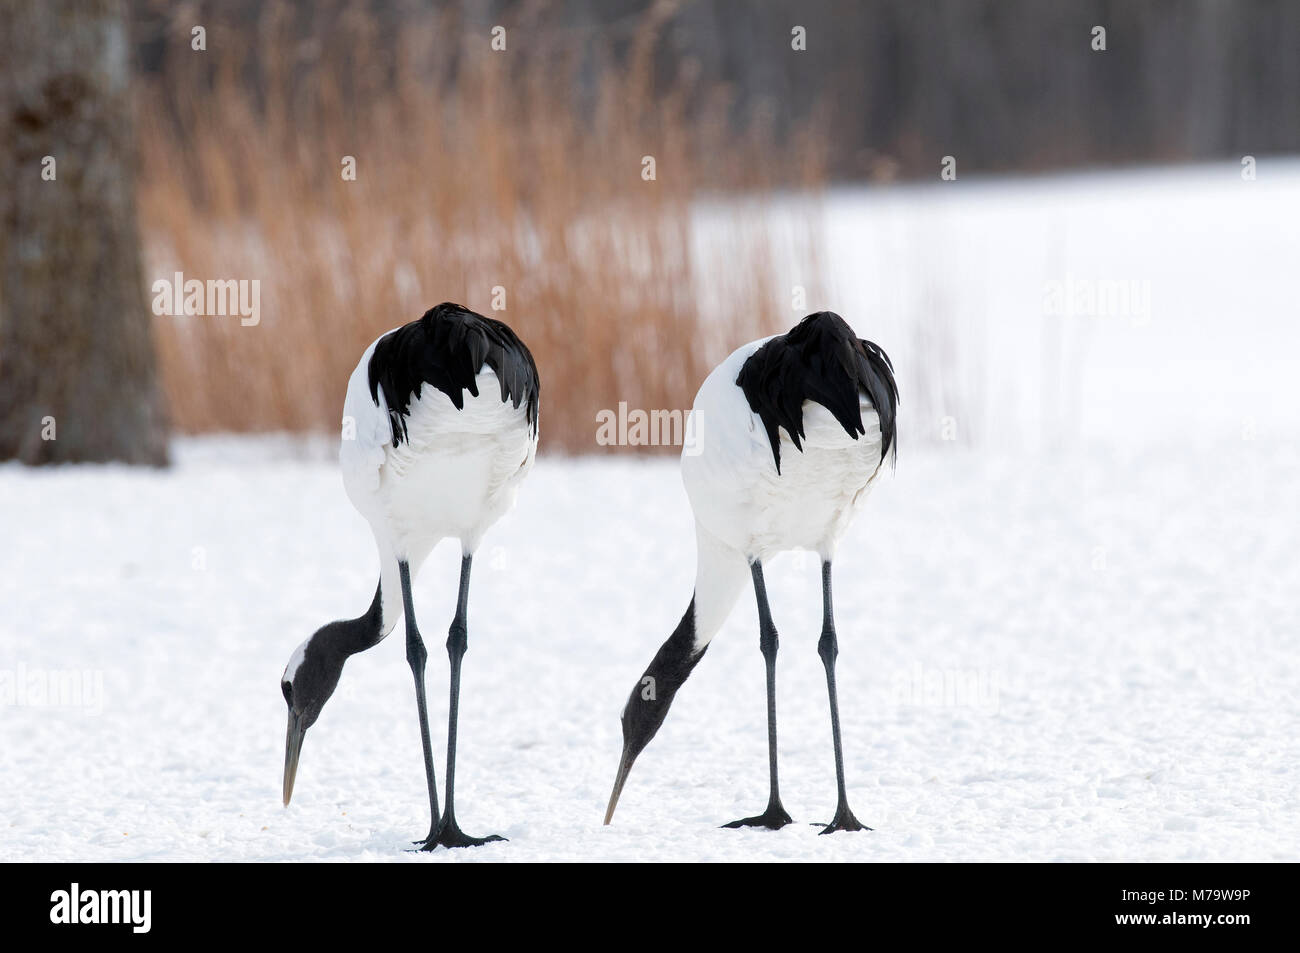 Gru giapponese, rosso-crowned crane (Grus japonensis) giovane, Giappone Foto Stock